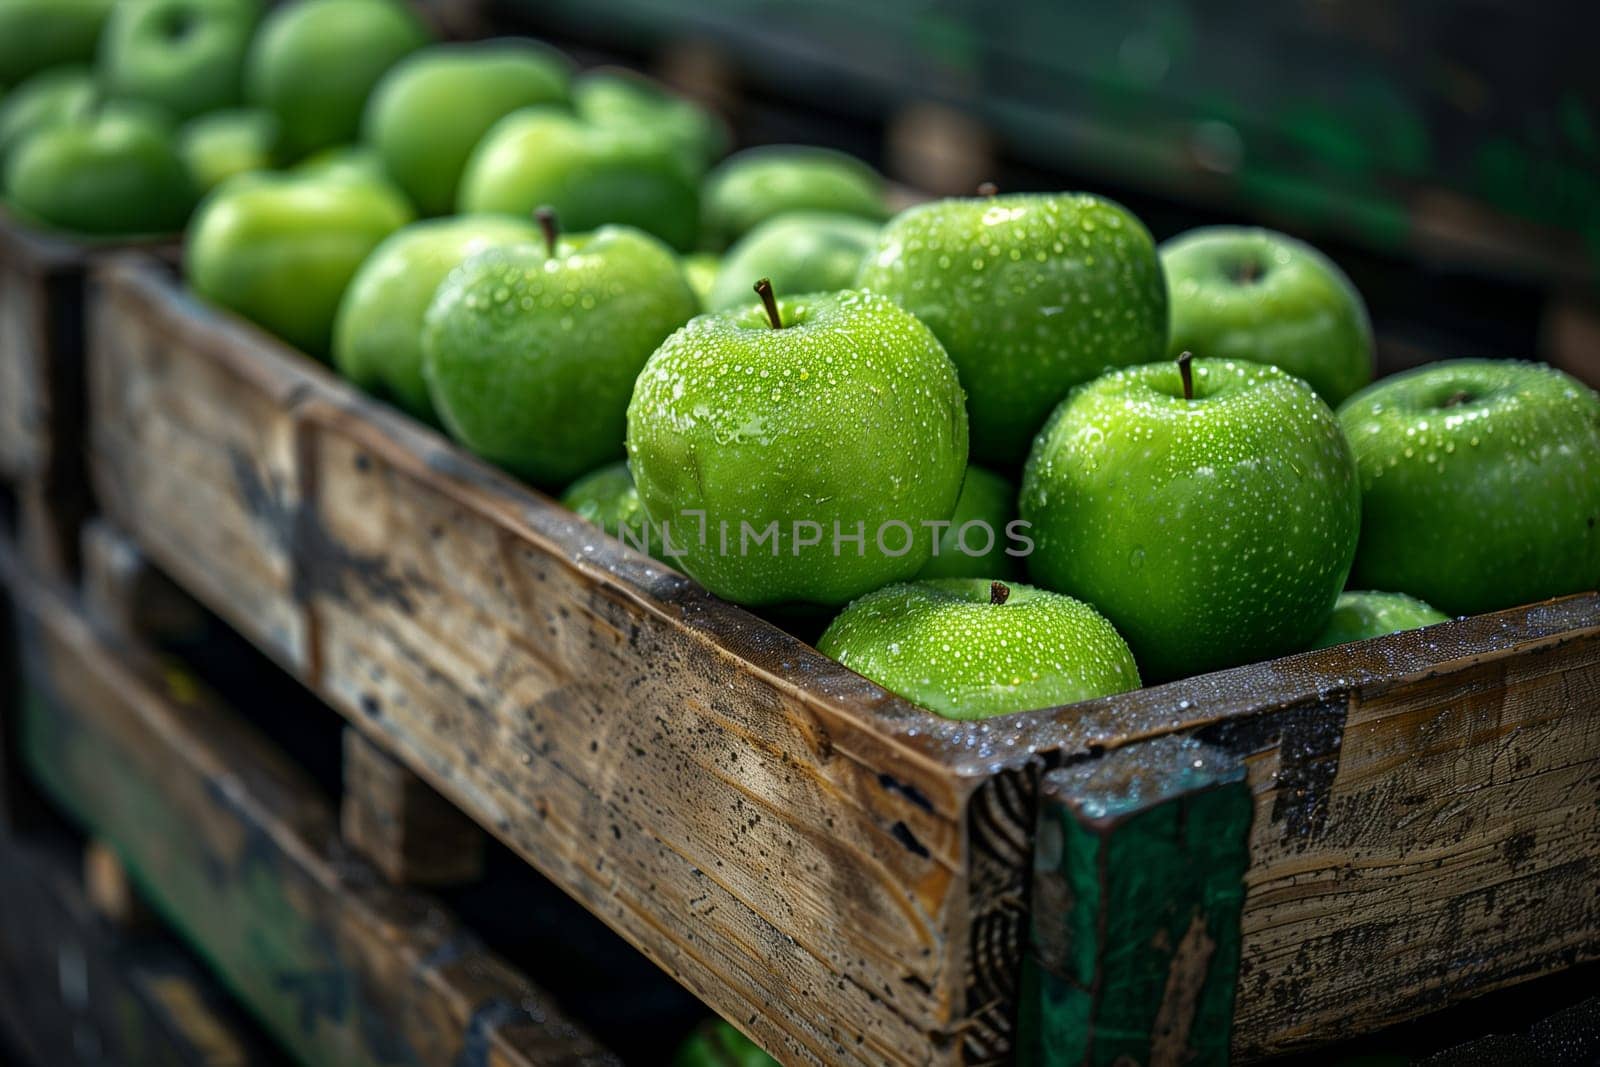 Wooden Crate Filled With Green Apples by Sd28DimoN_1976